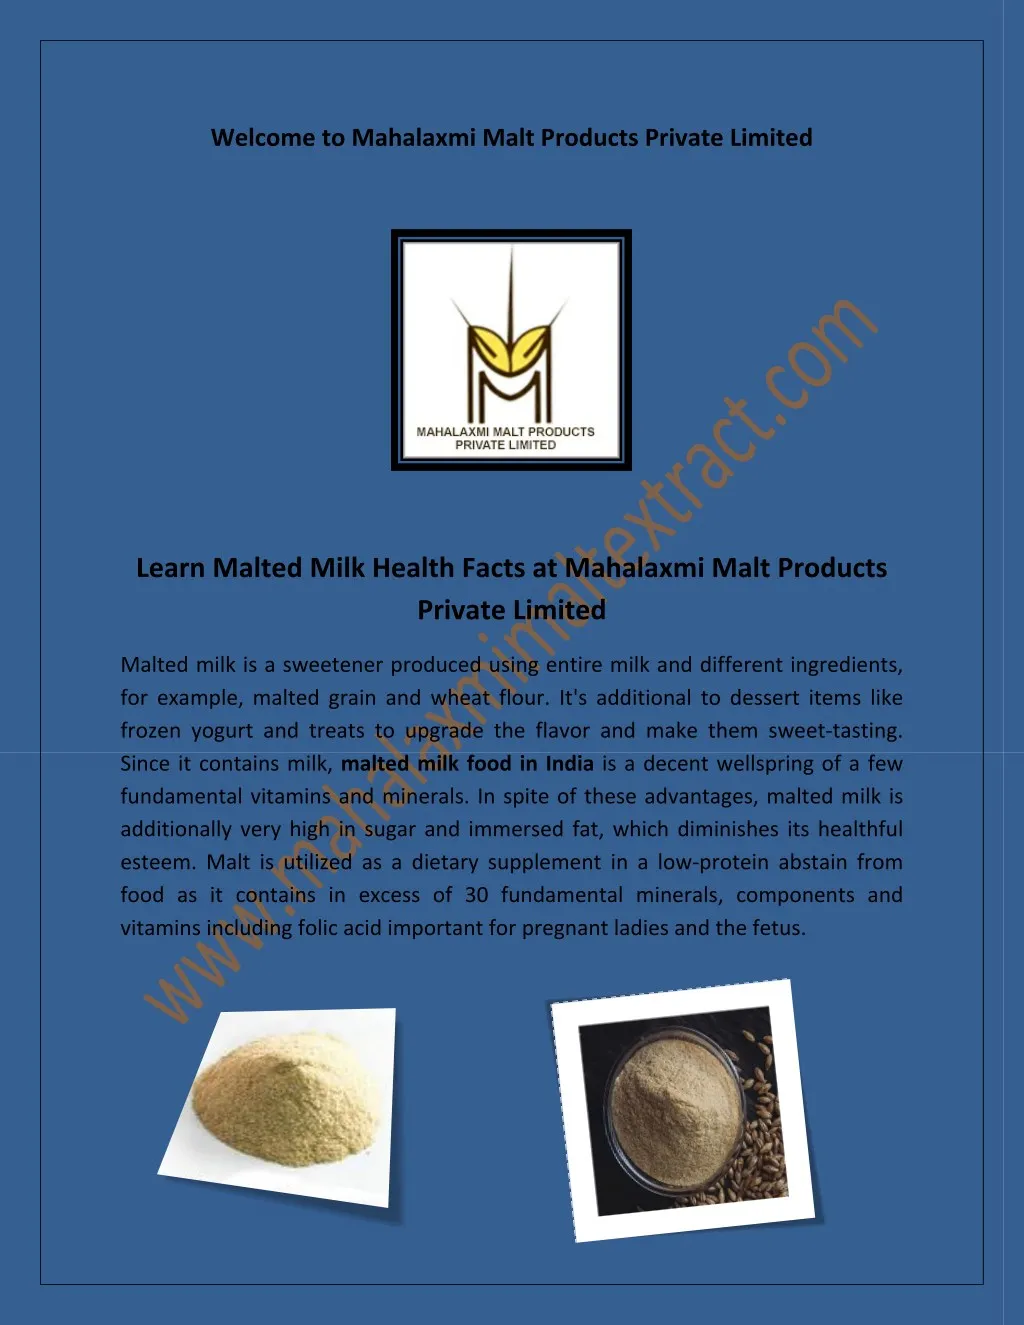 welcome to mahalaxmi malt products private limited